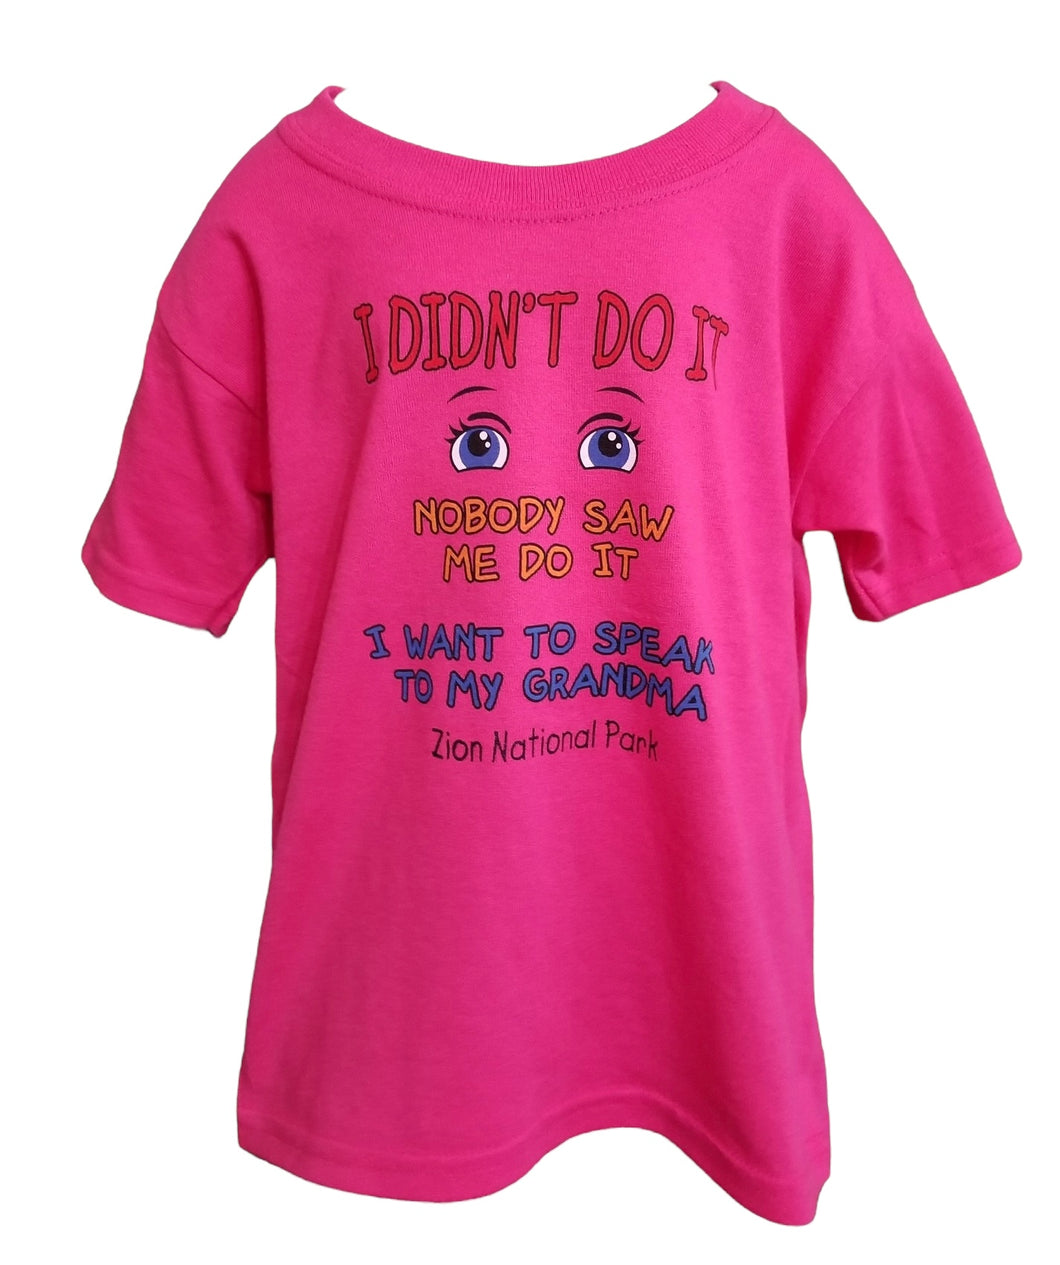 I Didn't Do It Youth Shirt